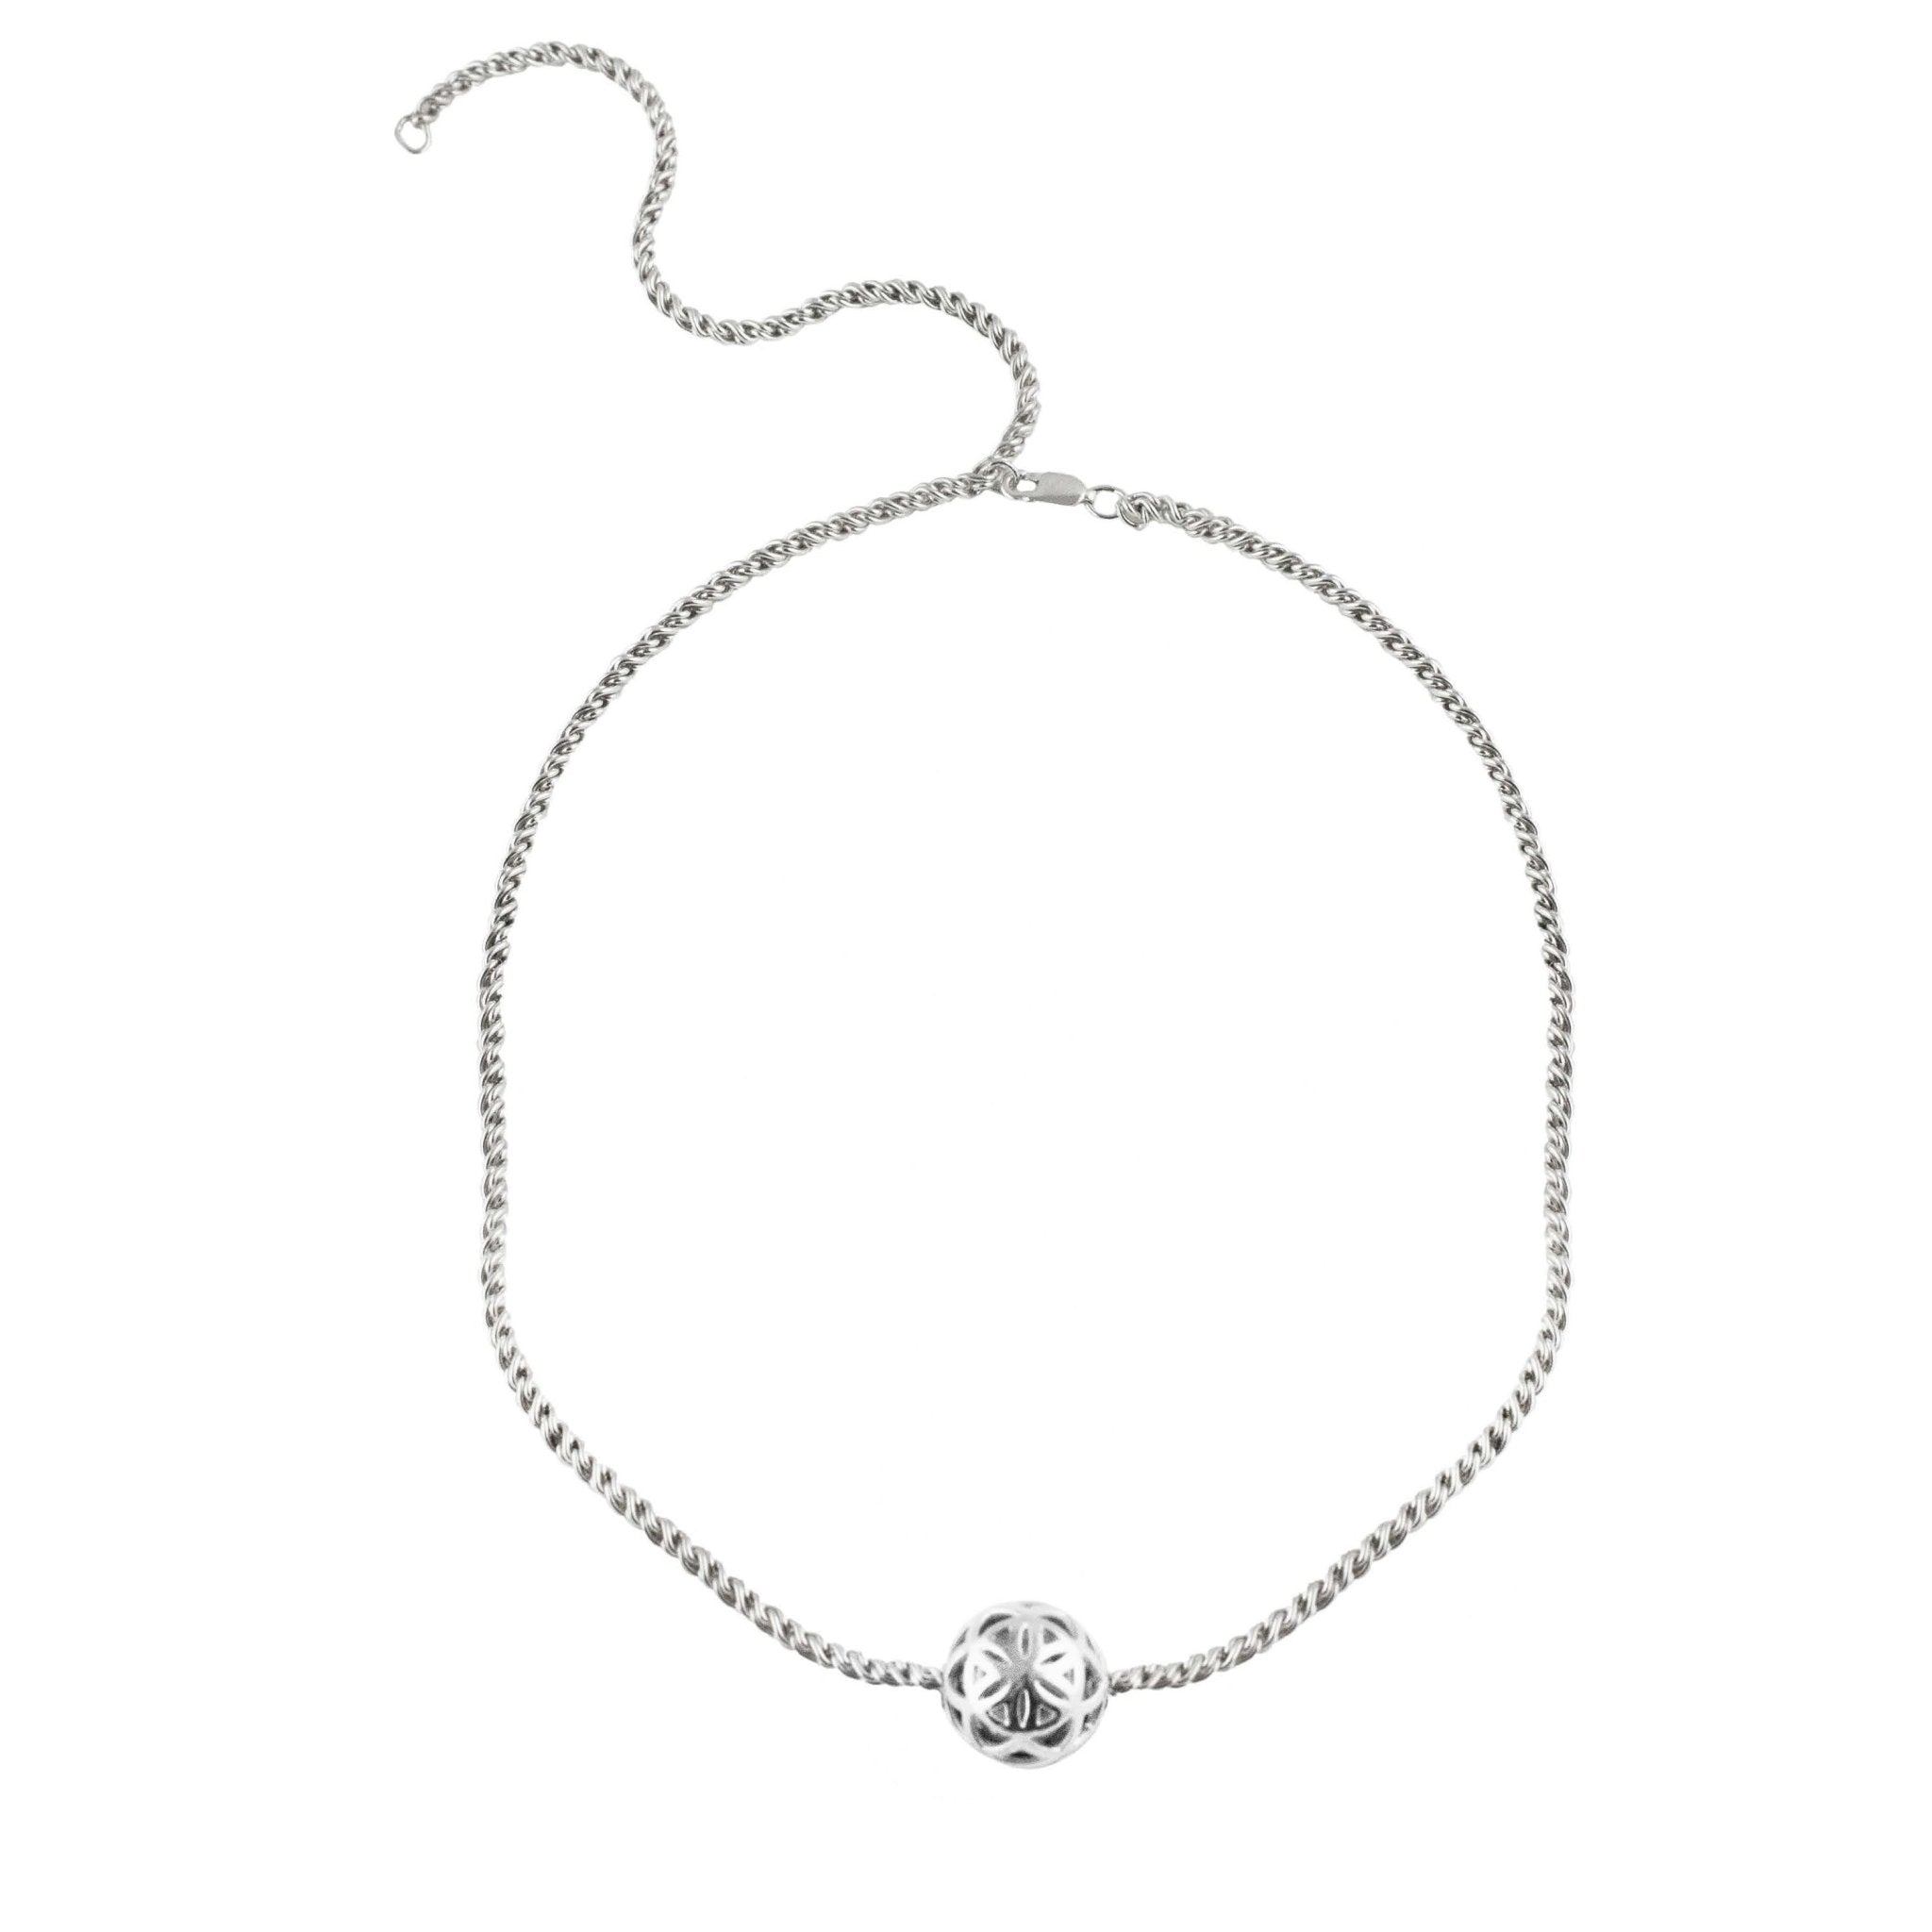 SPHERIC SEED OF LIFE CHOKER NECKLACE - SILVERcategory_Accessories from ARTICLE22 - SHOPELEOS